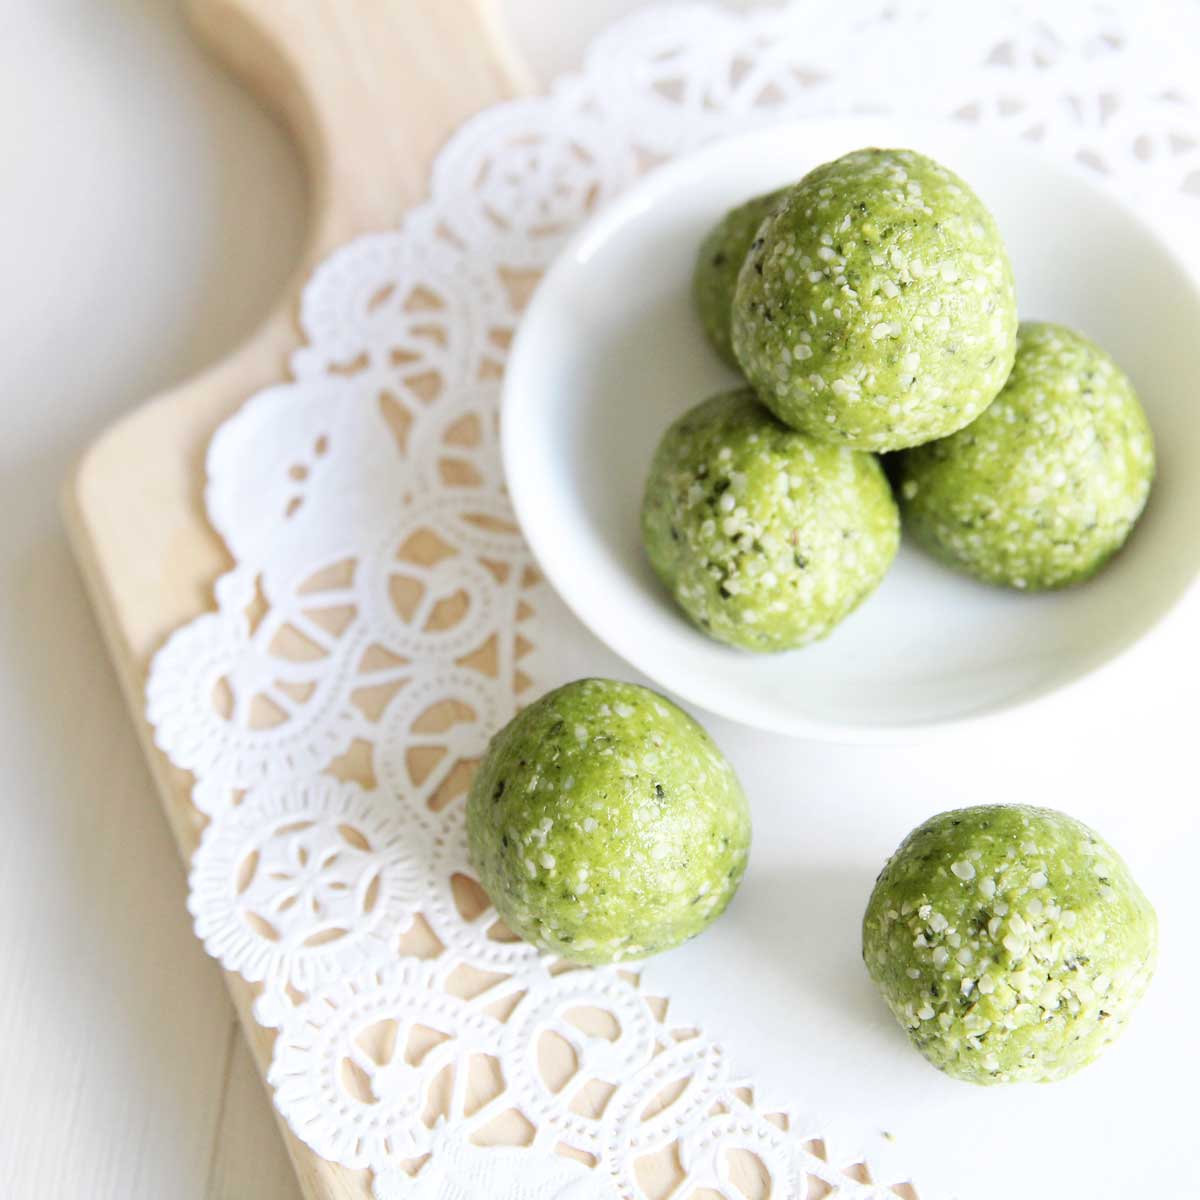 Power Packed Matcha Latte Protein Balls Recipe with Collagen Peptides - PB Fit Protein Bars